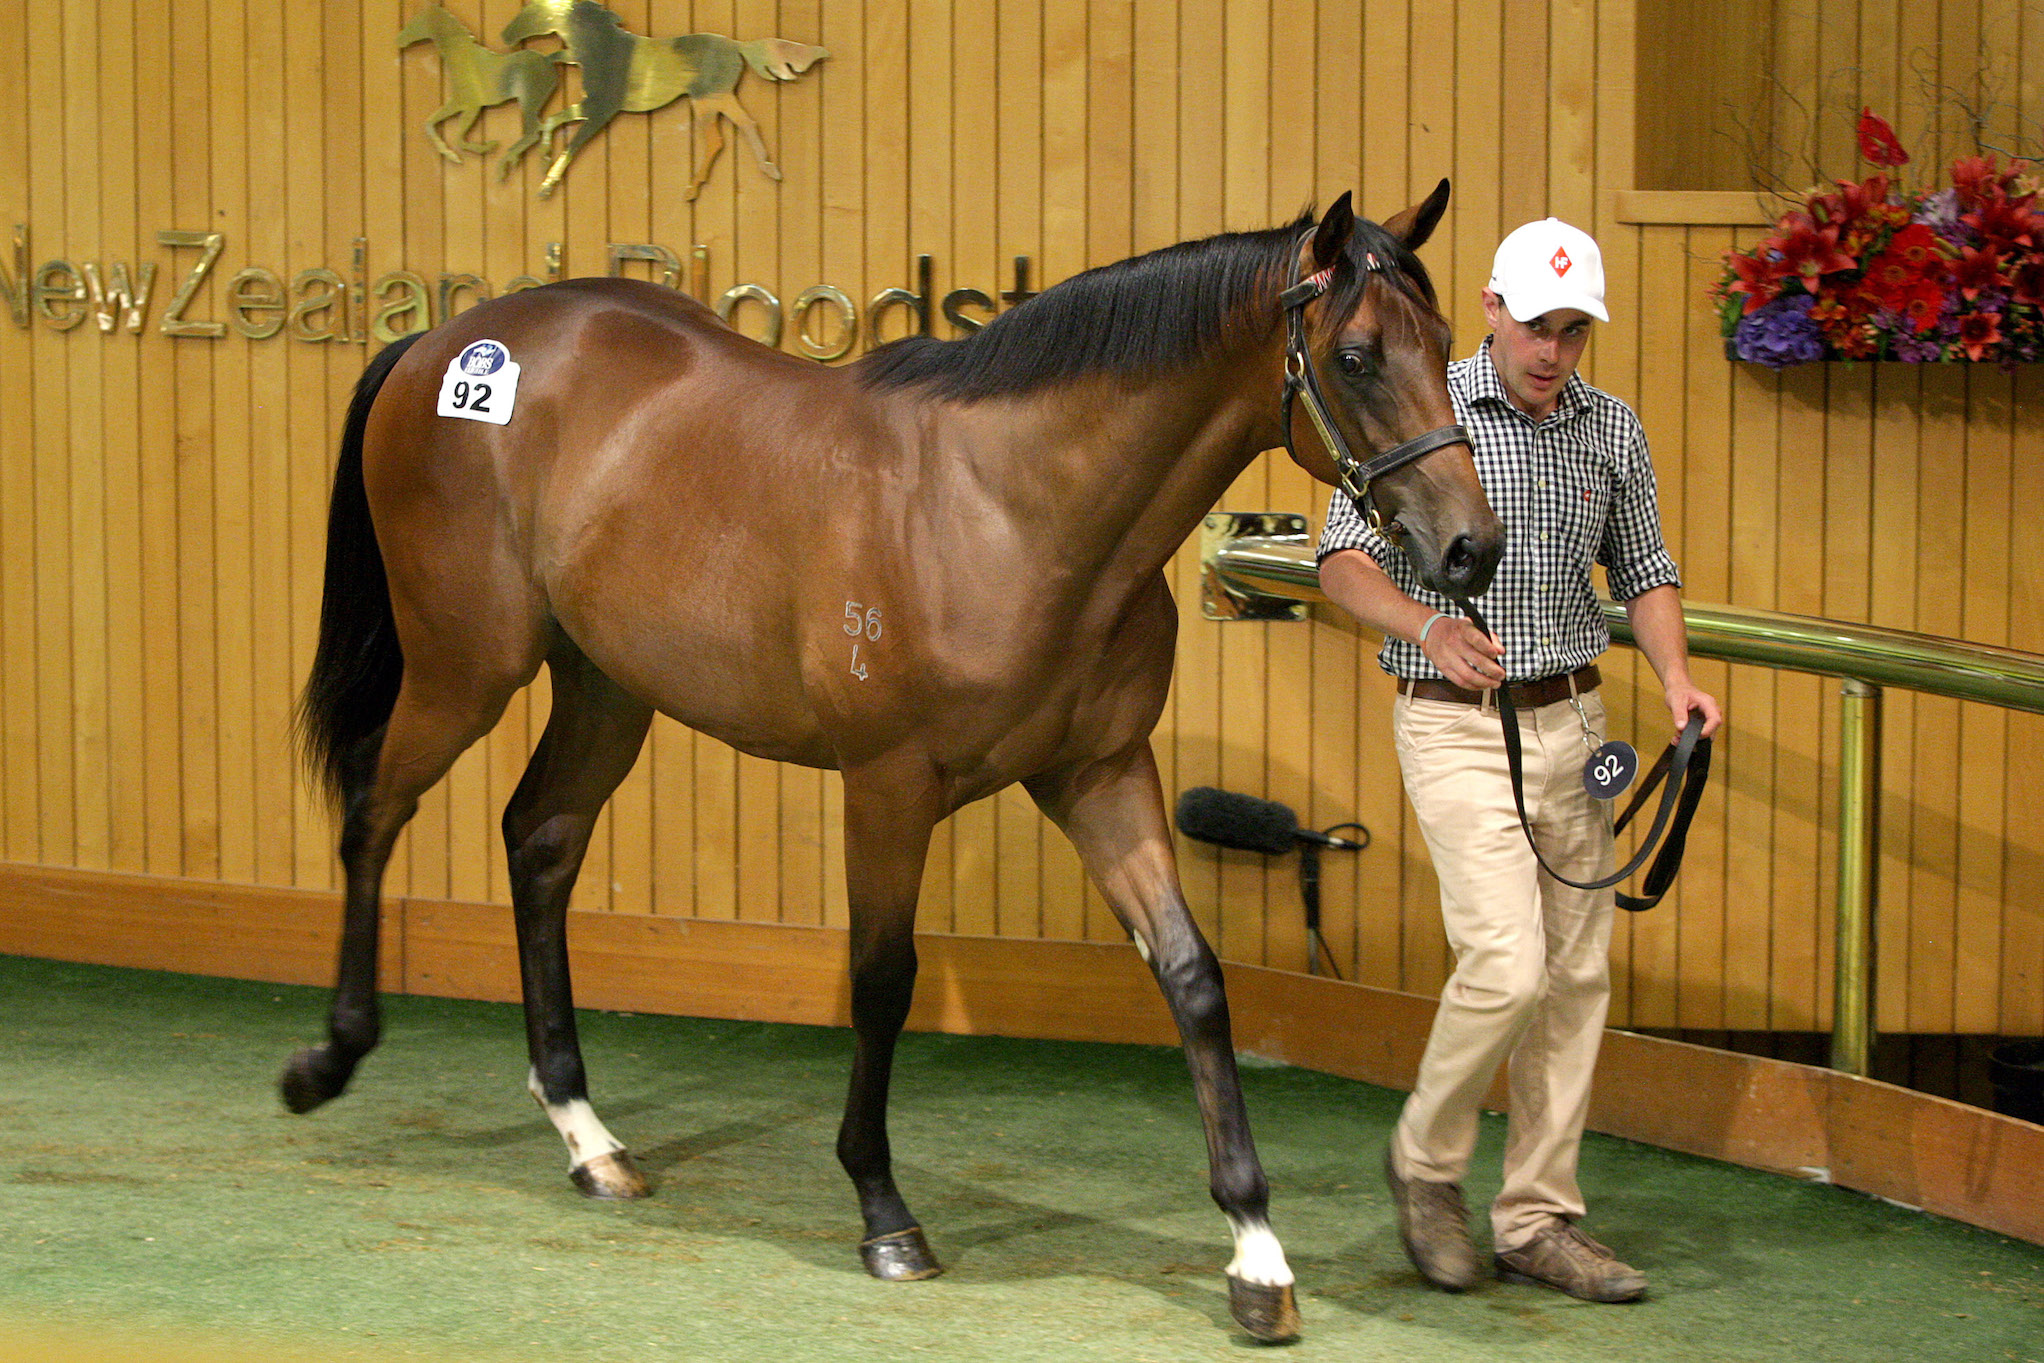 Furore as a yearling at the New Zealand Bloodstock National Yearling Sales. Photo: Trish Dunell